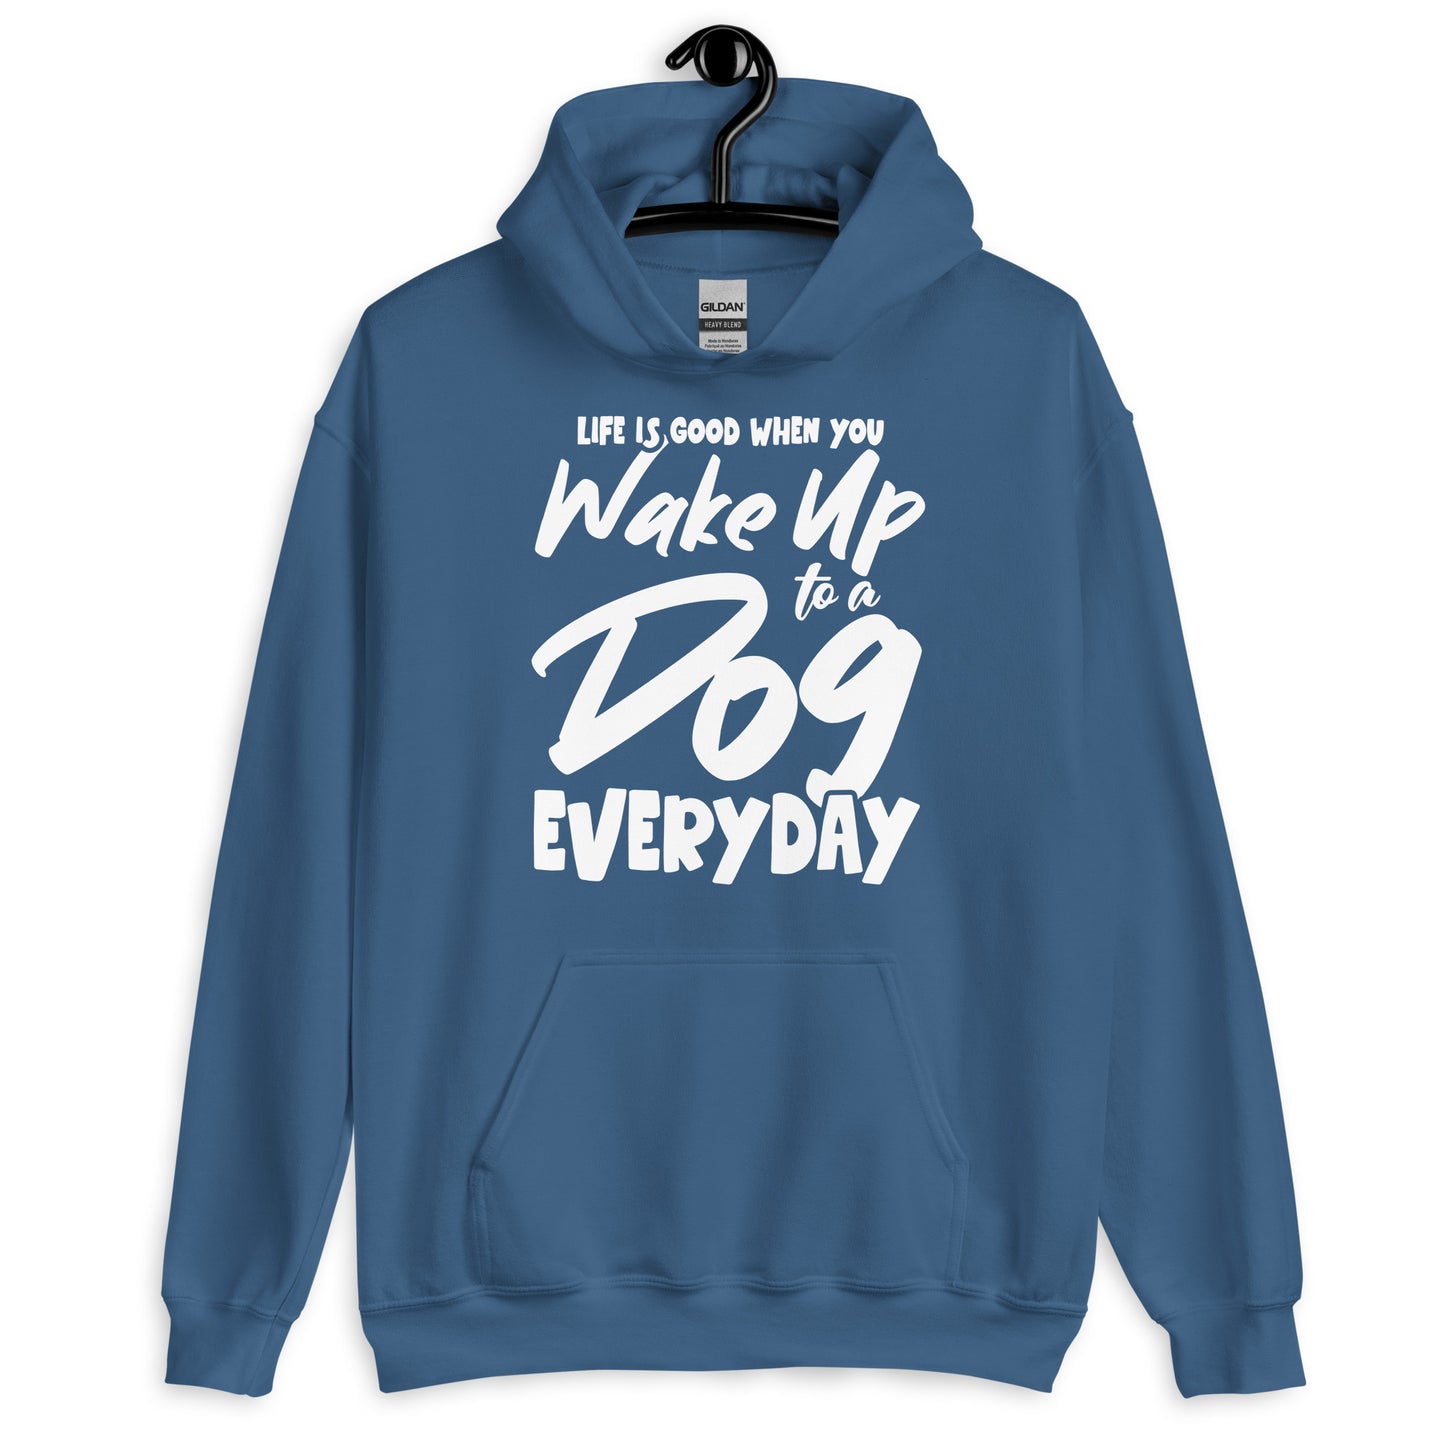 Life is Good When You Wake Up to a Dog Everyday Hoodie